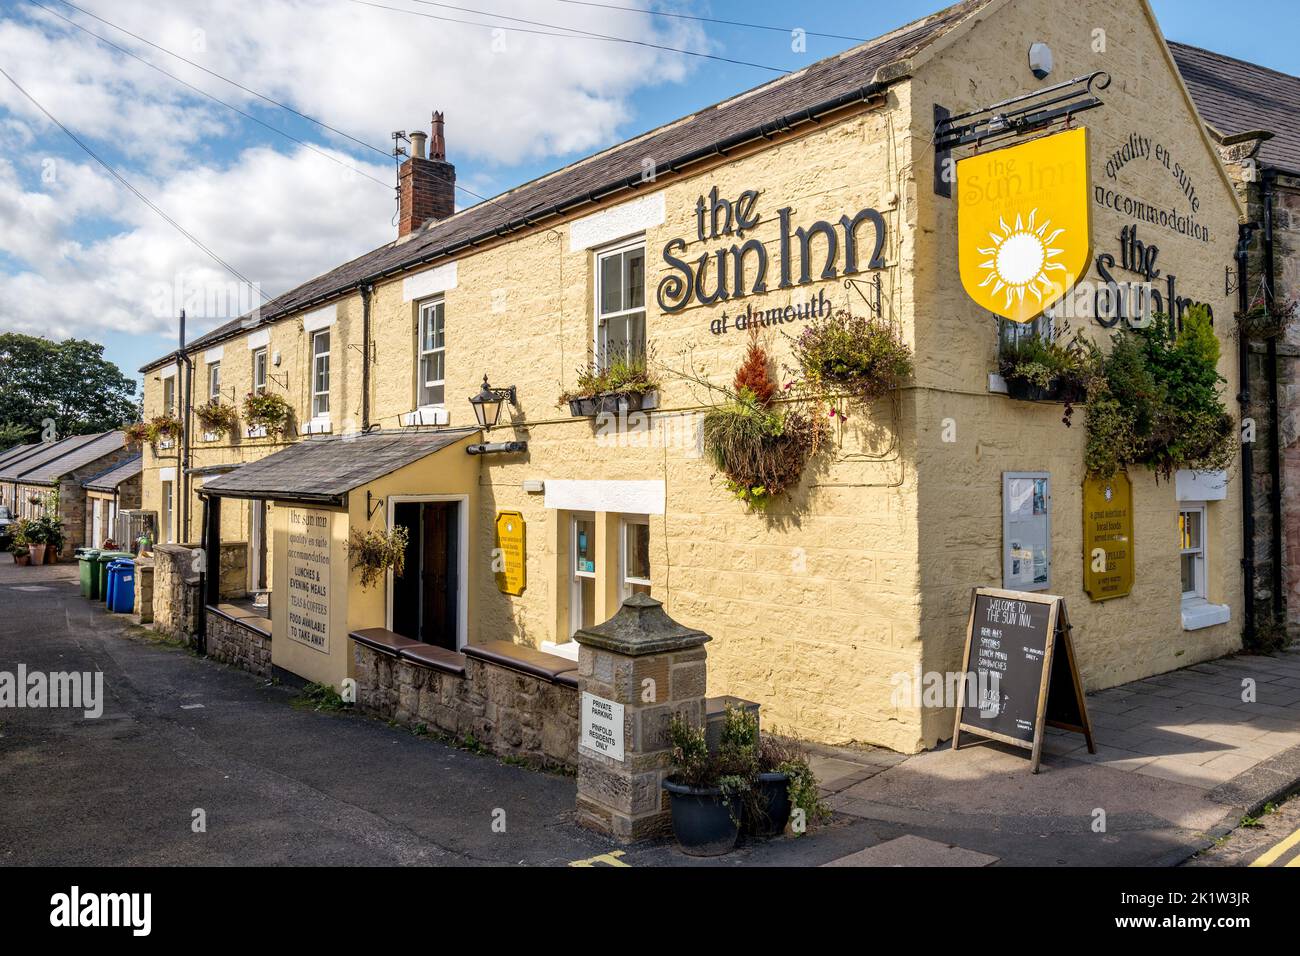 The Star Inn, a public house or pub in the coastal village of Alnmouth, Northumberland, England, UK Stock Photo